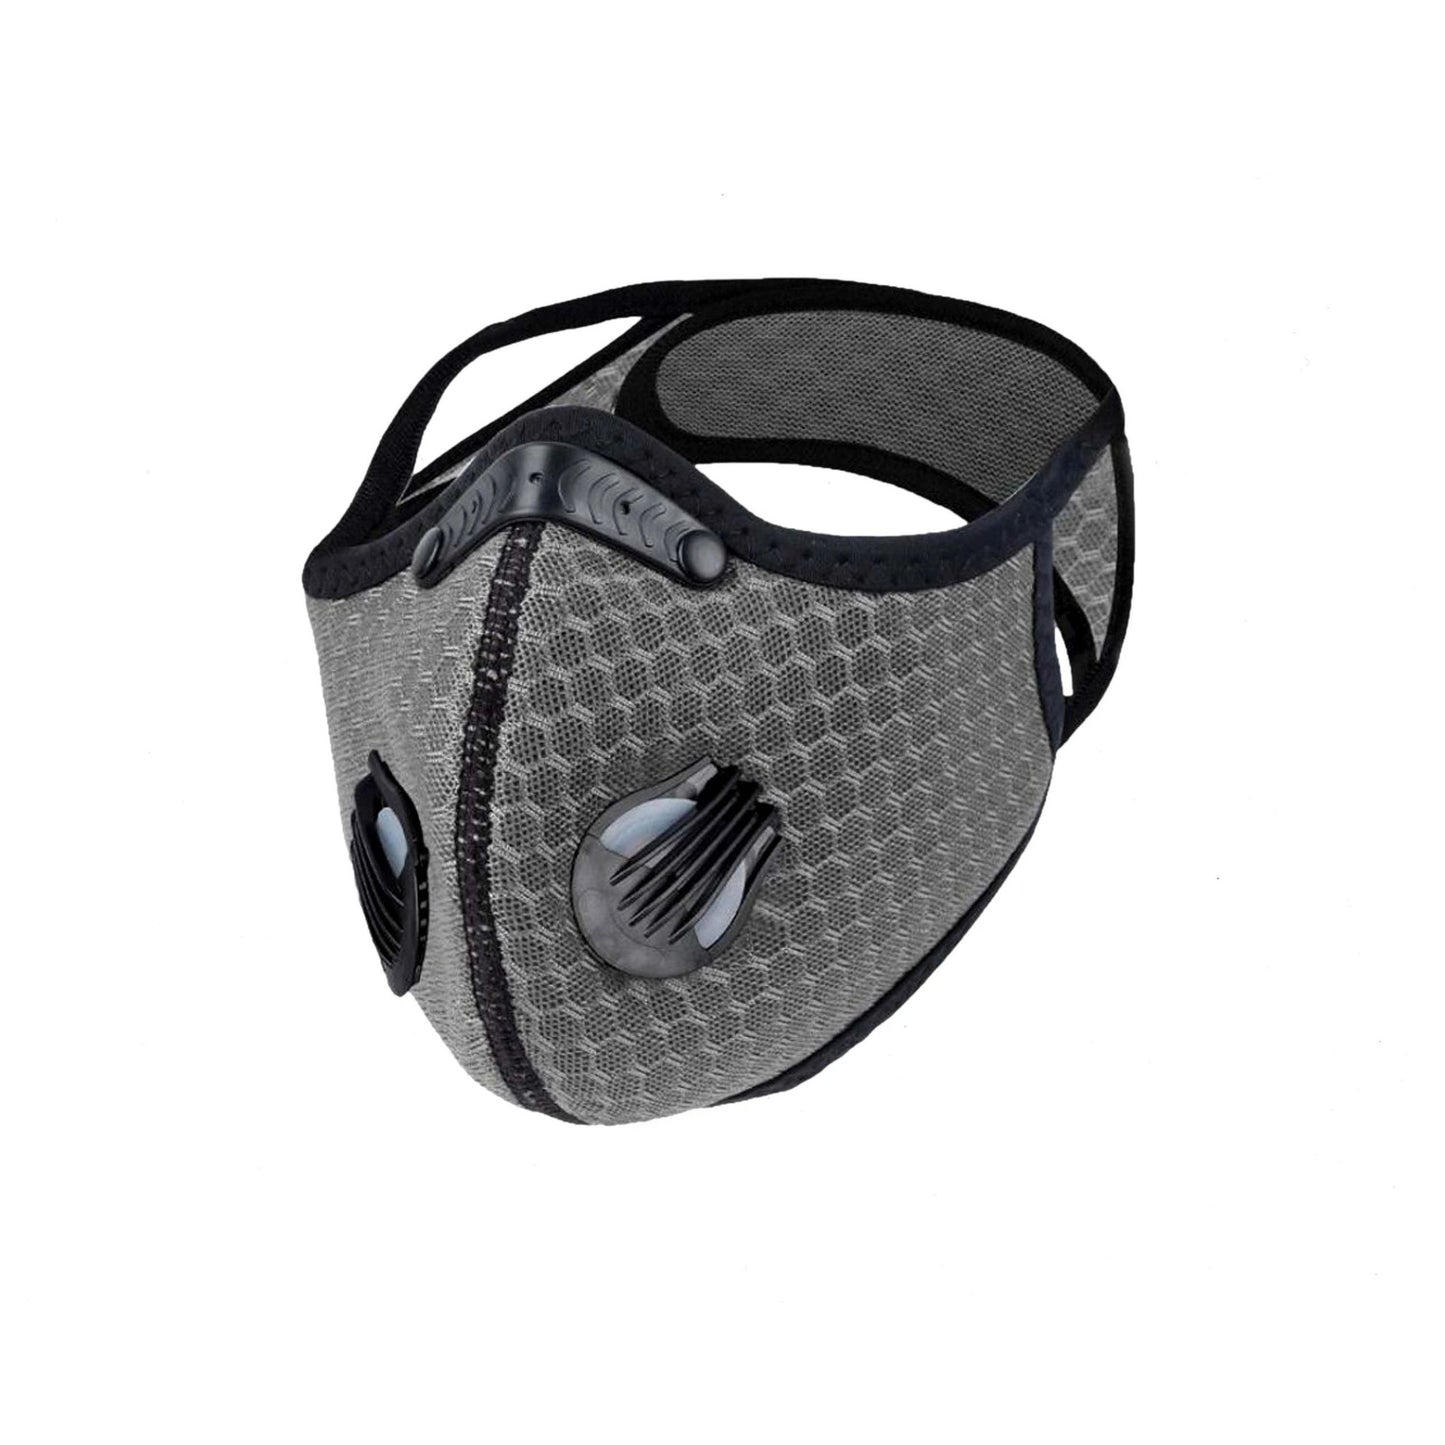 Washable and Reusable Sport Valve Mask With Velcro Closure